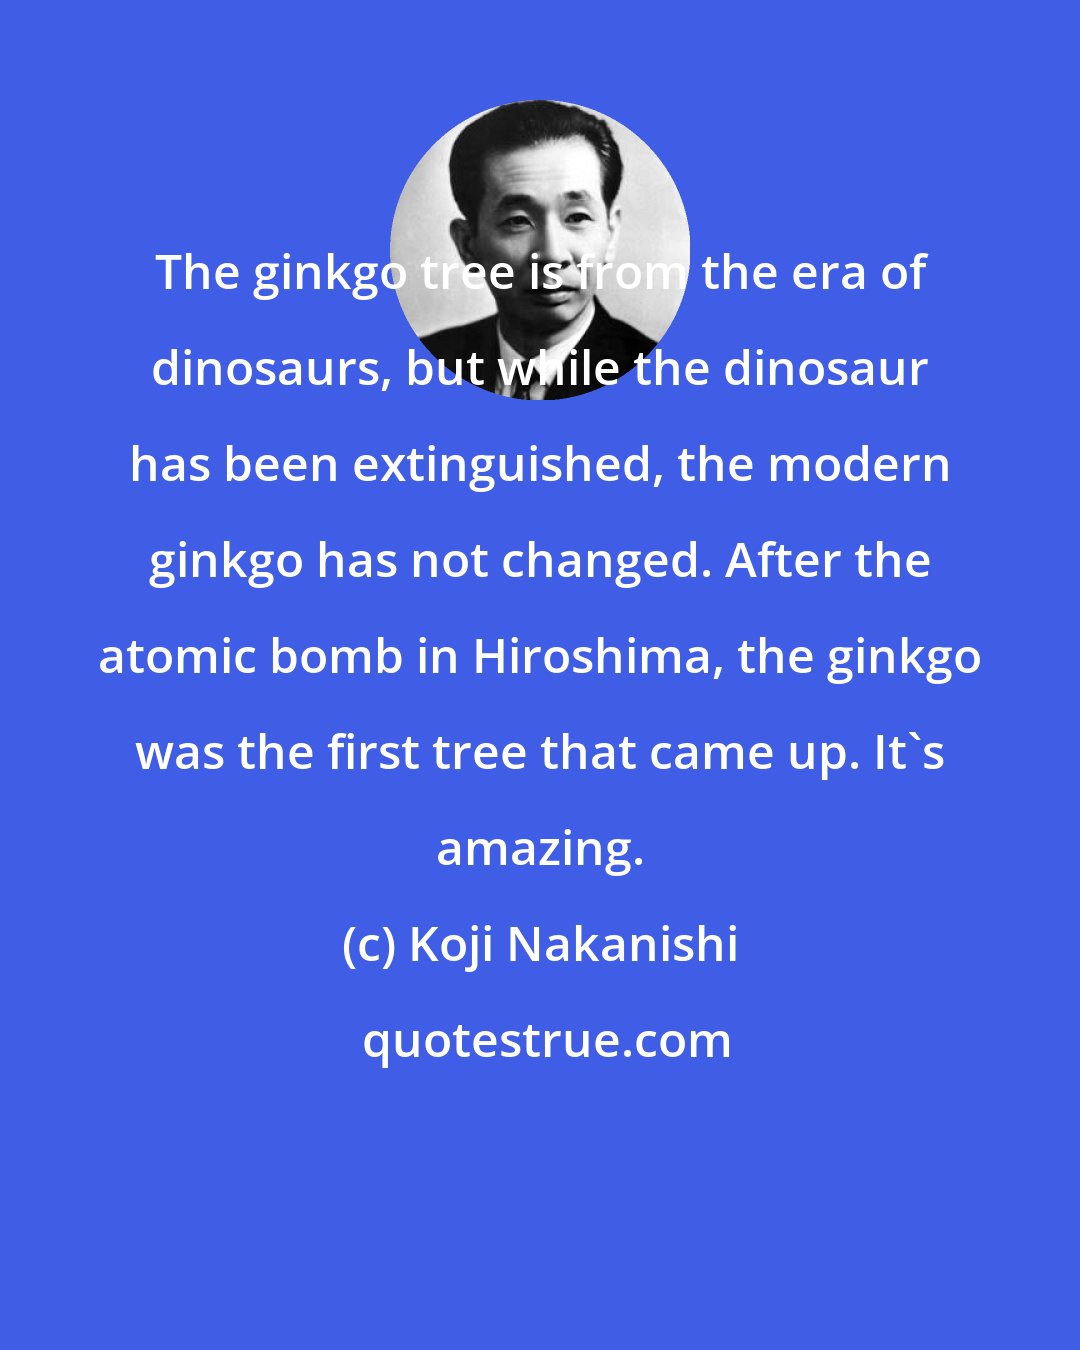 Koji Nakanishi: The ginkgo tree is from the era of dinosaurs, but while the dinosaur has been extinguished, the modern ginkgo has not changed. After the atomic bomb in Hiroshima, the ginkgo was the first tree that came up. It's amazing.